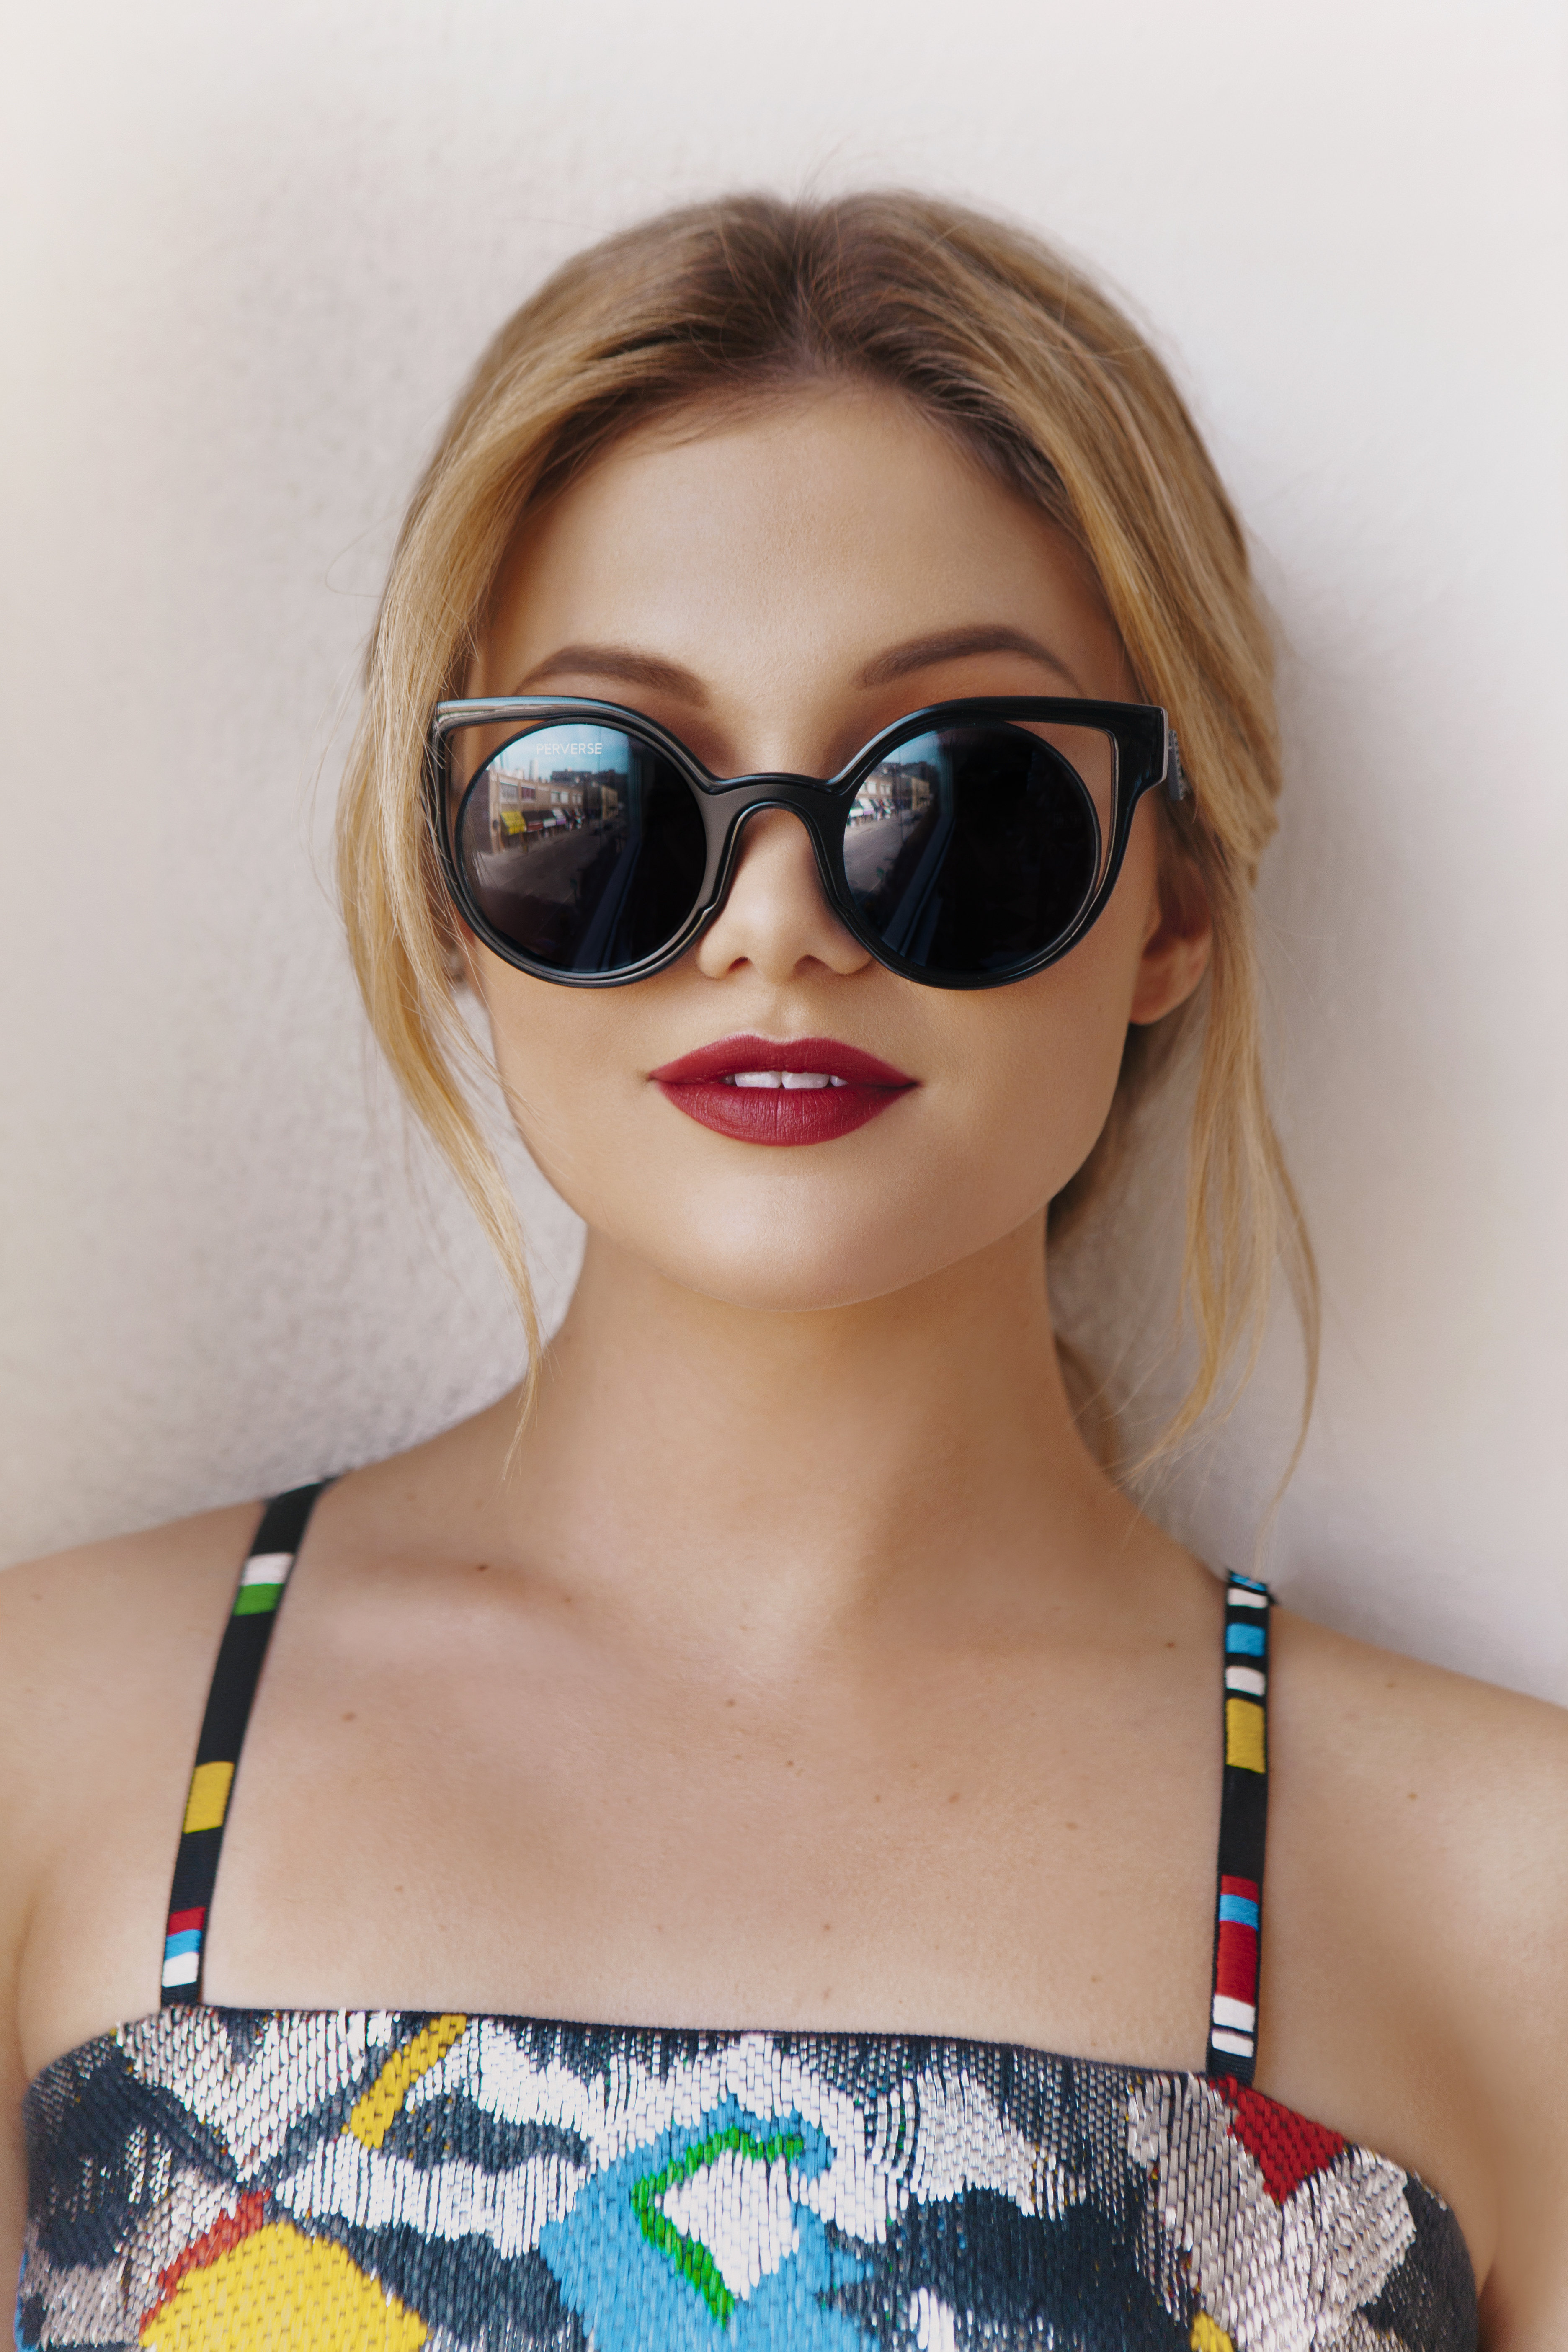 People 3744x5616 Olivia Holt women singer women with shades lipstick reflection women indoors American women sunglasses red lipstick indoors makeup model actress